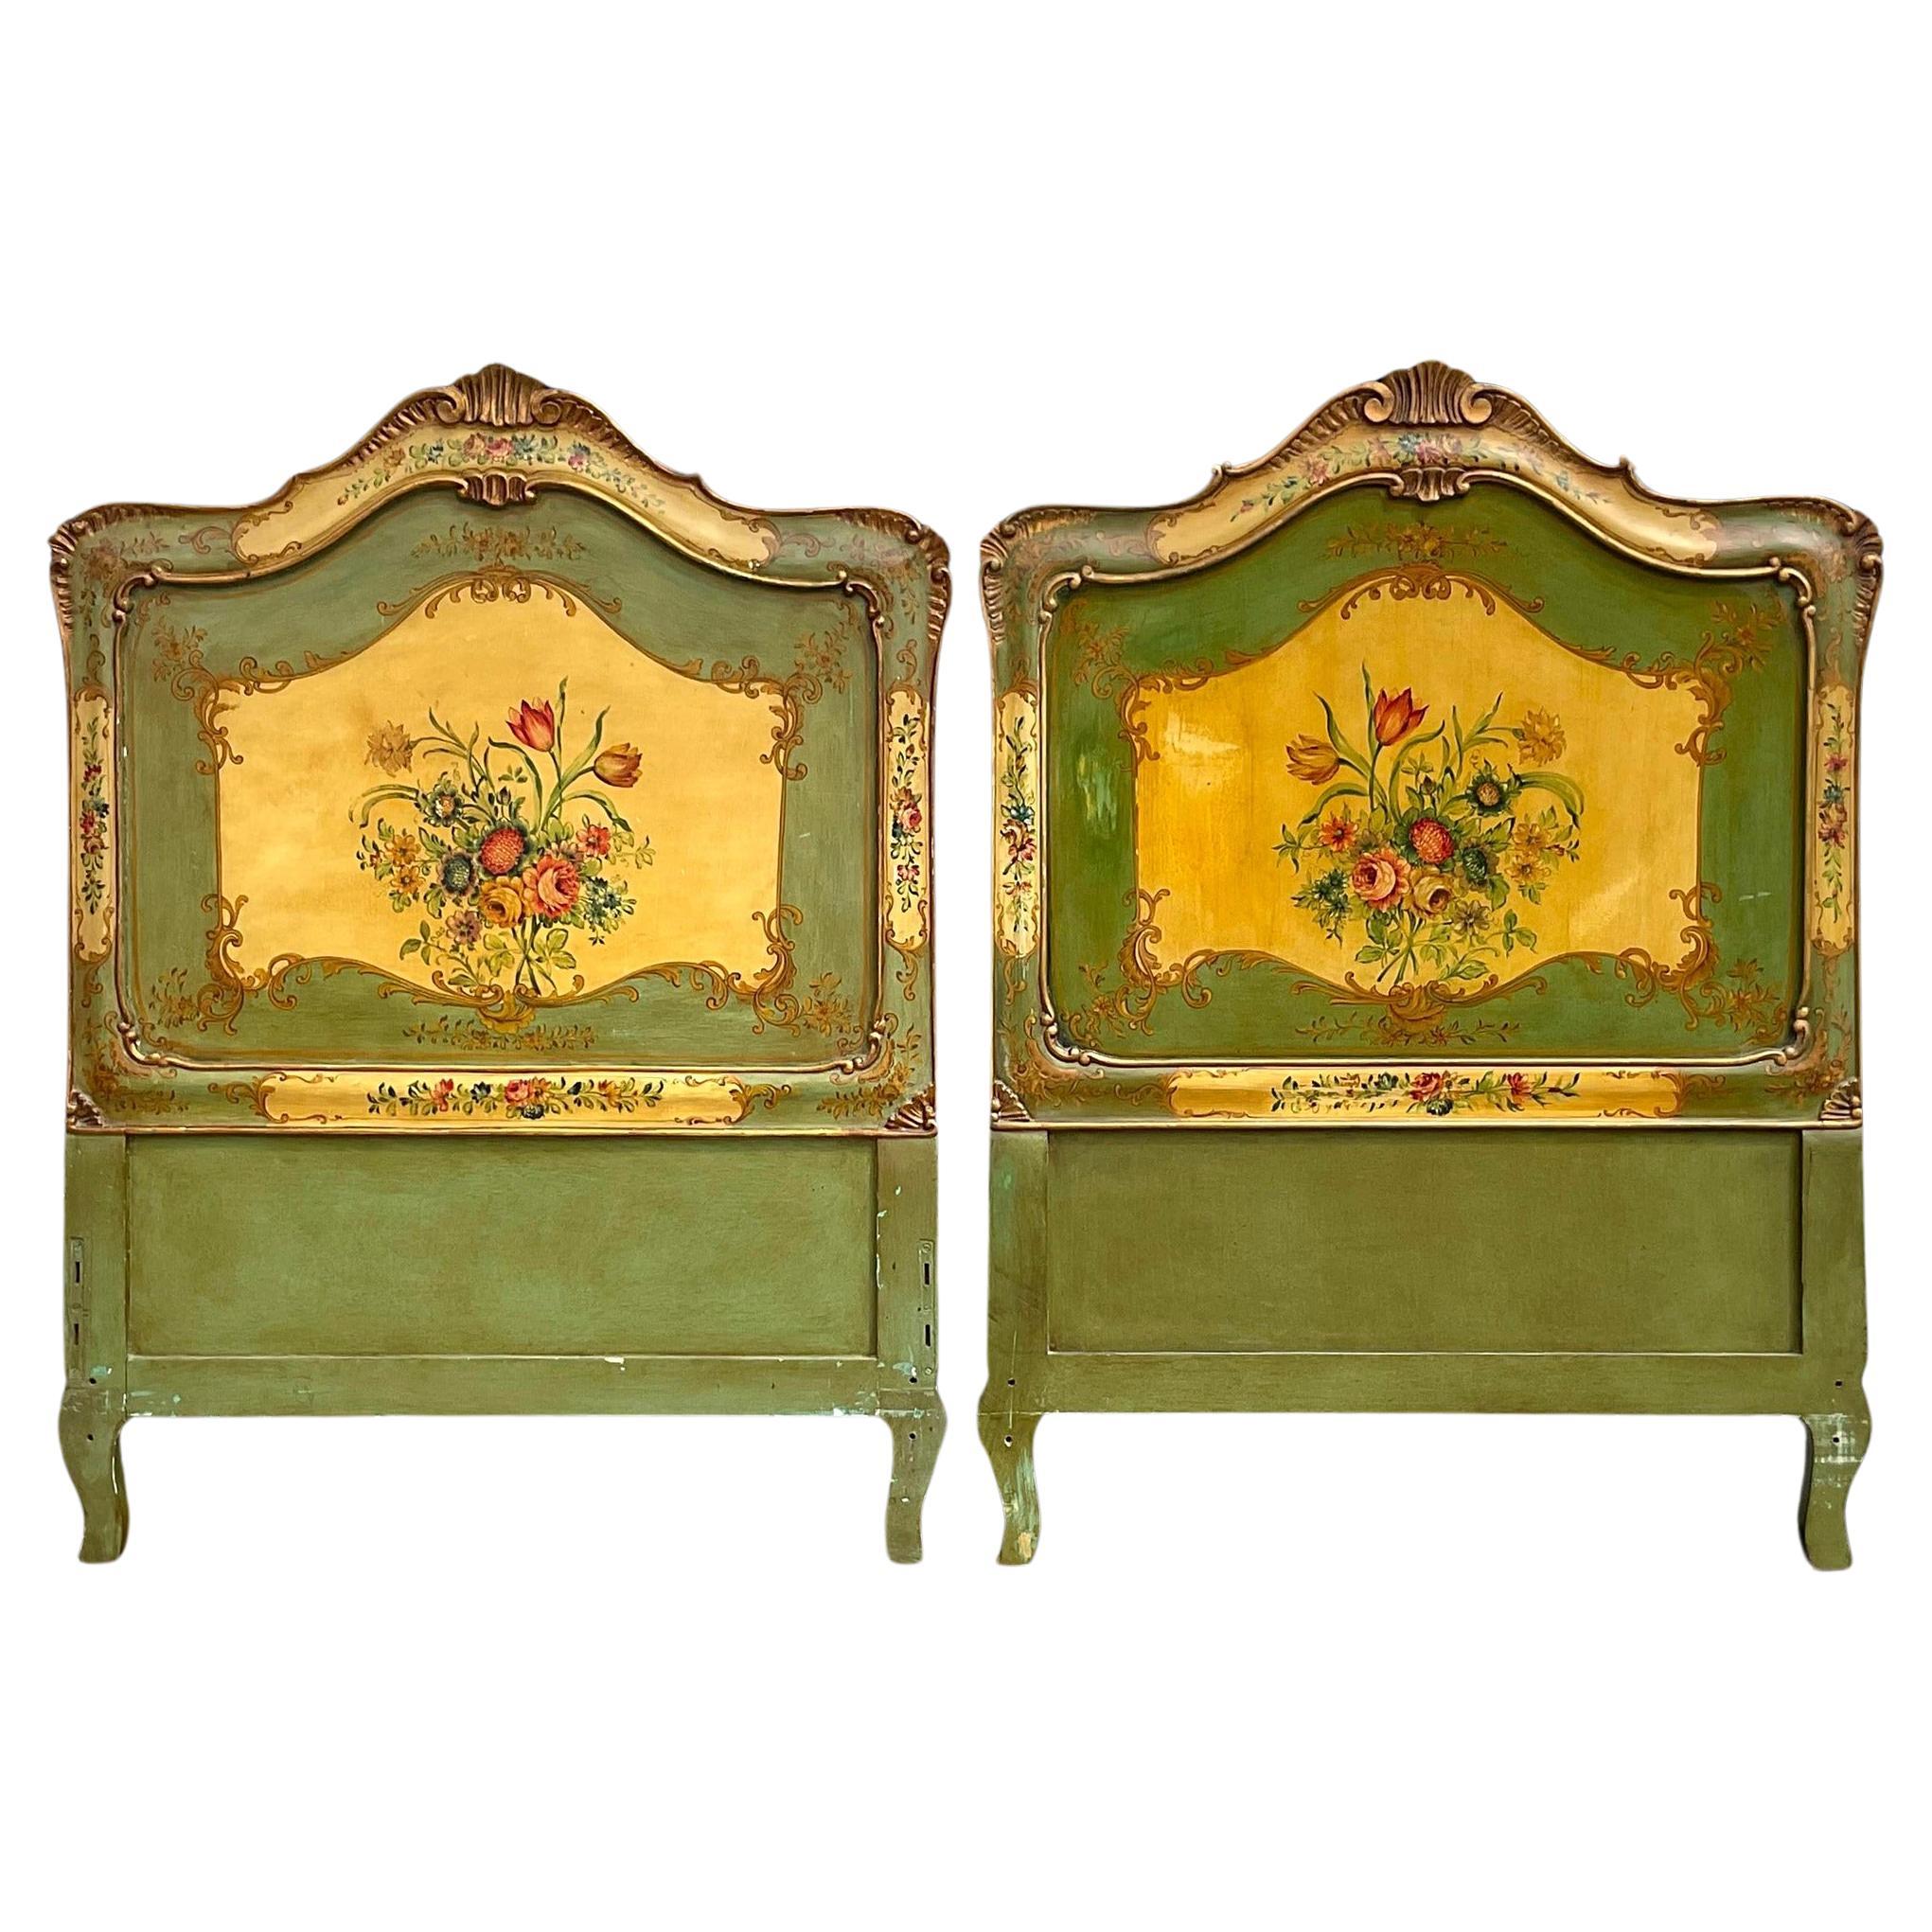 Vintage Italian Hand Painted Floral Twin Headboards - a Pair For Sale